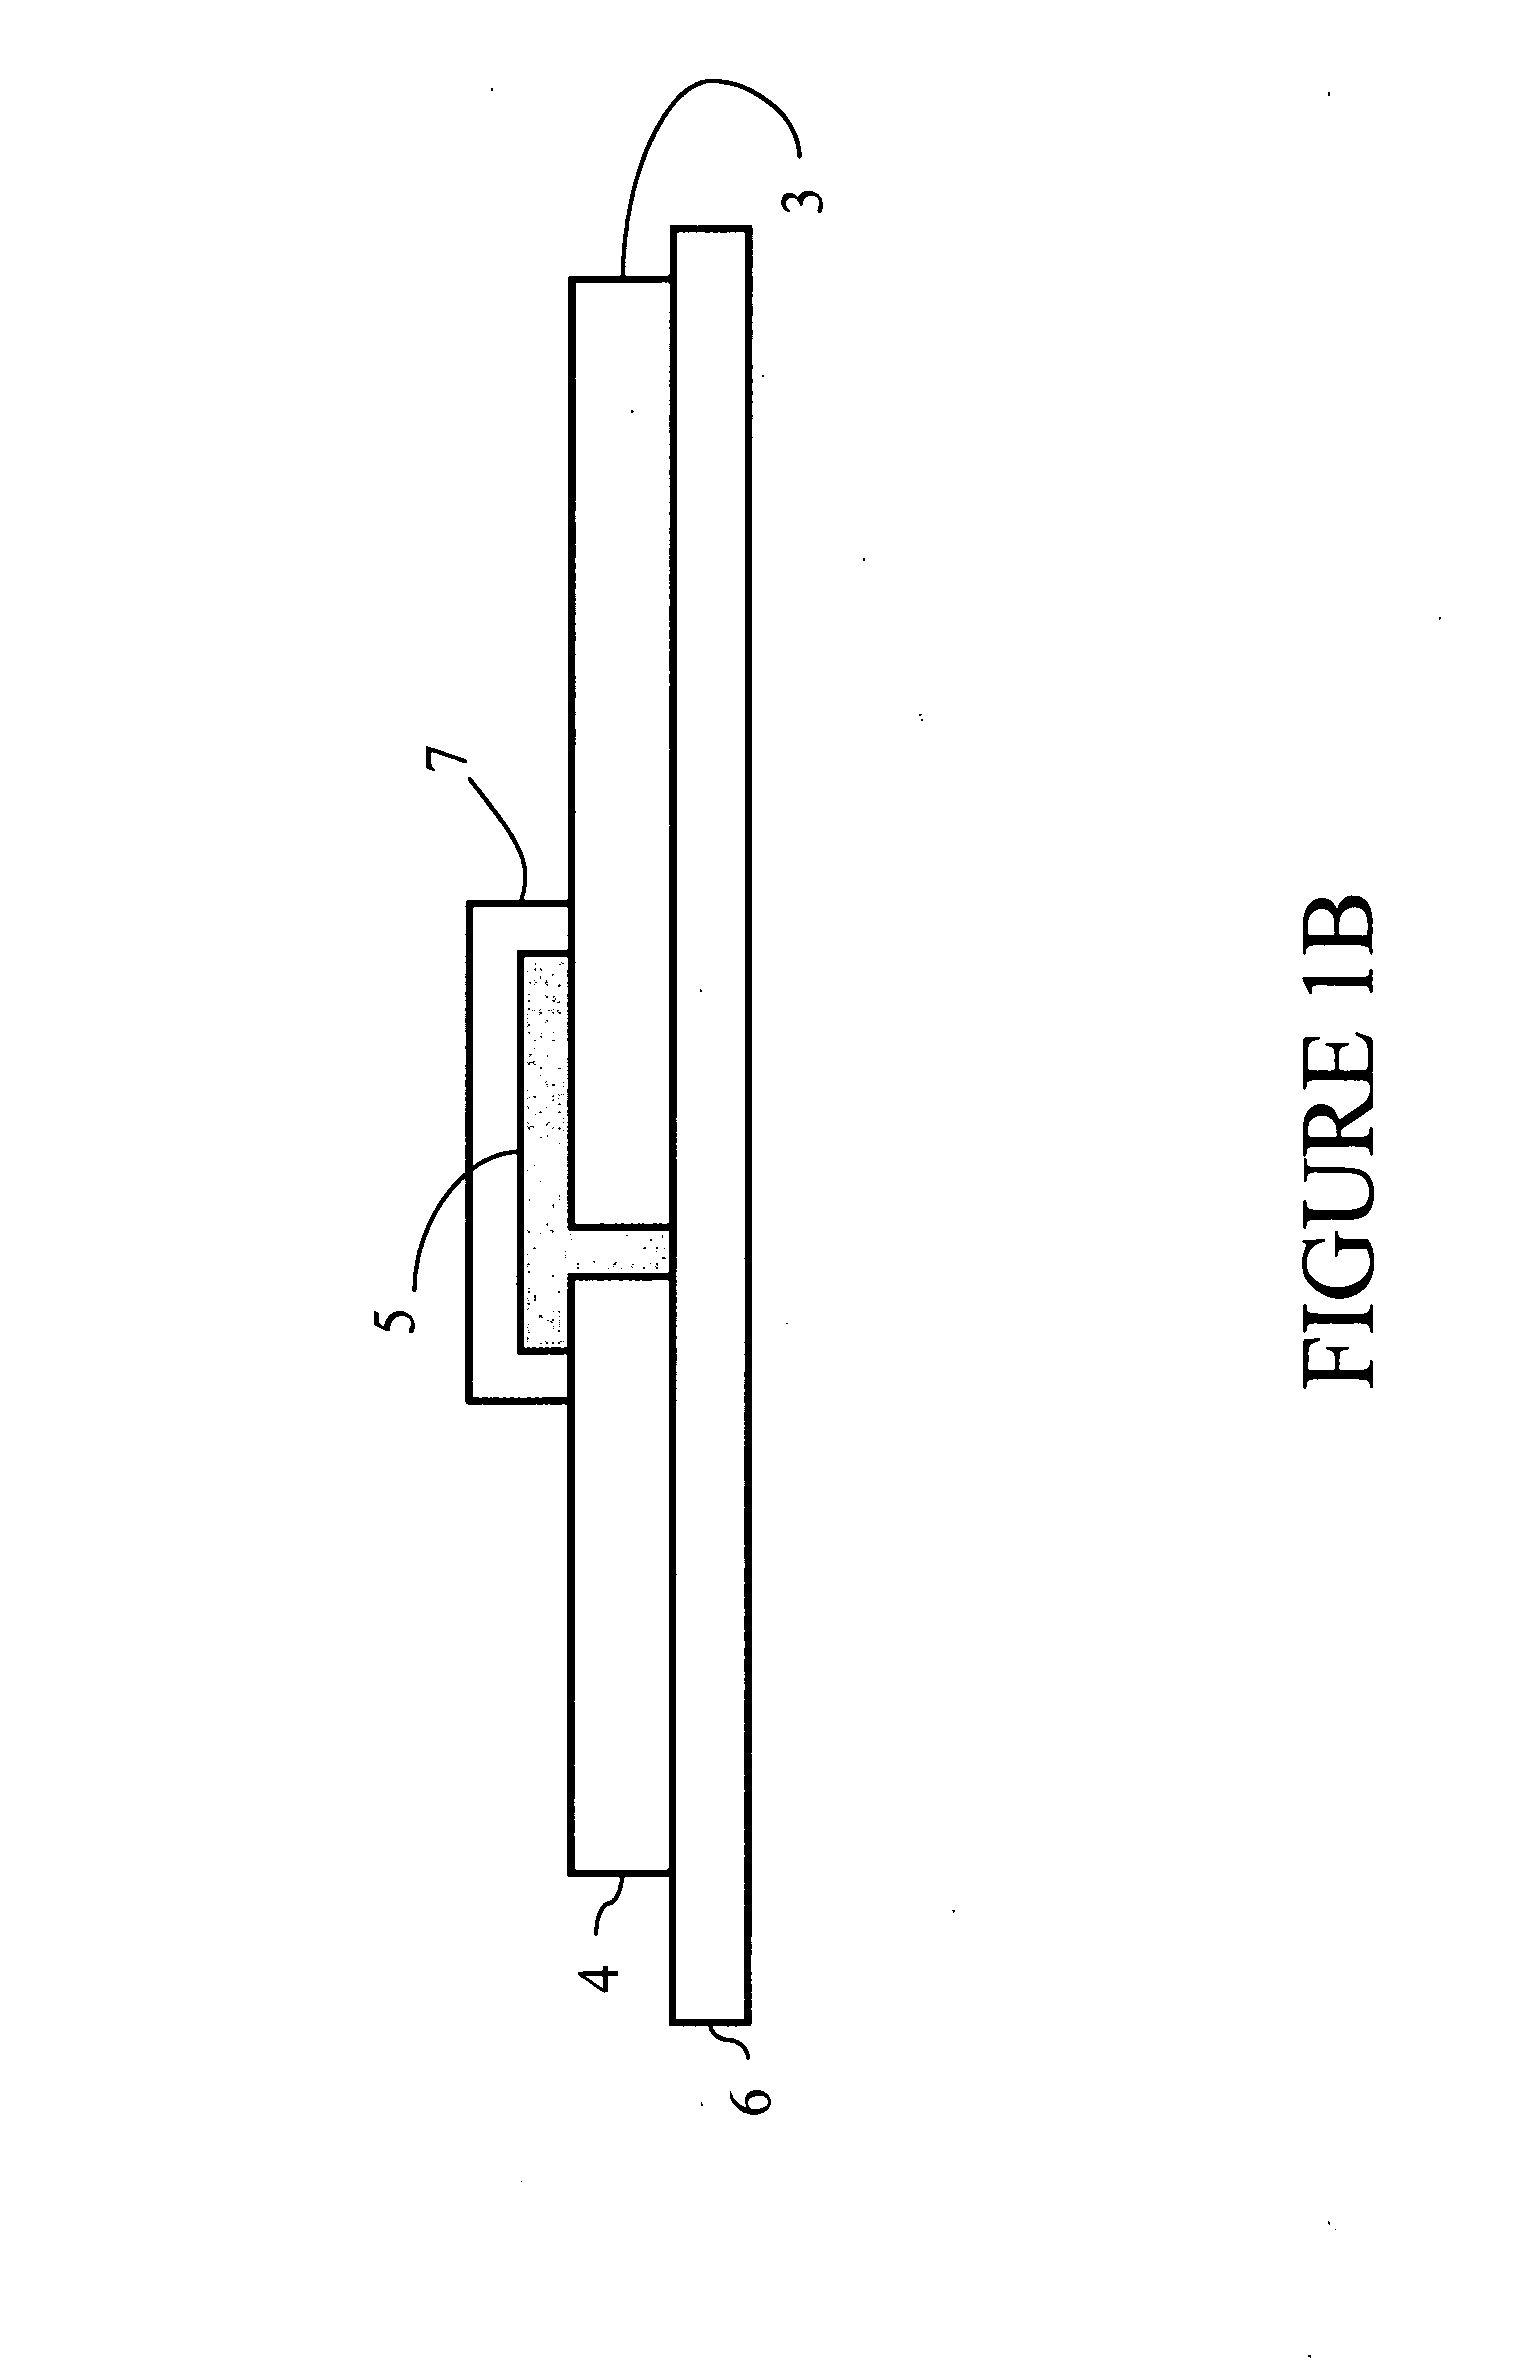 Electrochemical device and methods for producing the same